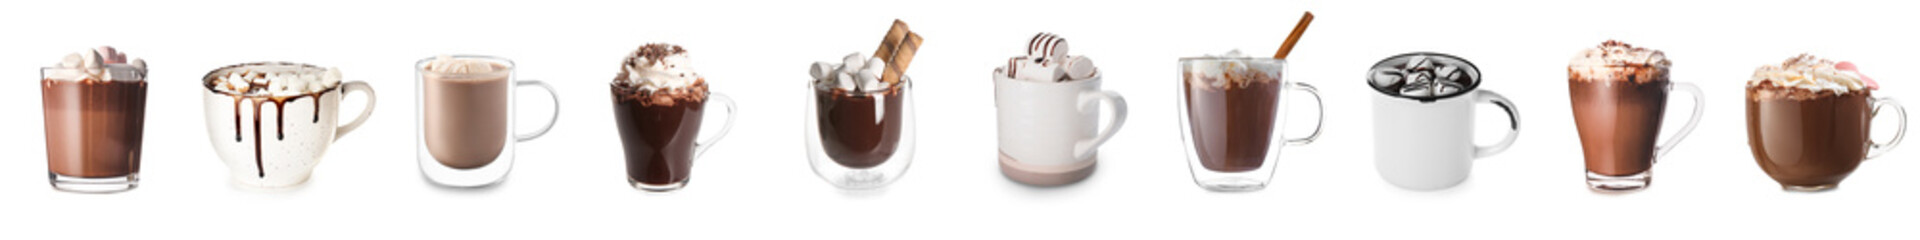 Set of tasty hot chocolate with marshmallows and whipped cream on white background